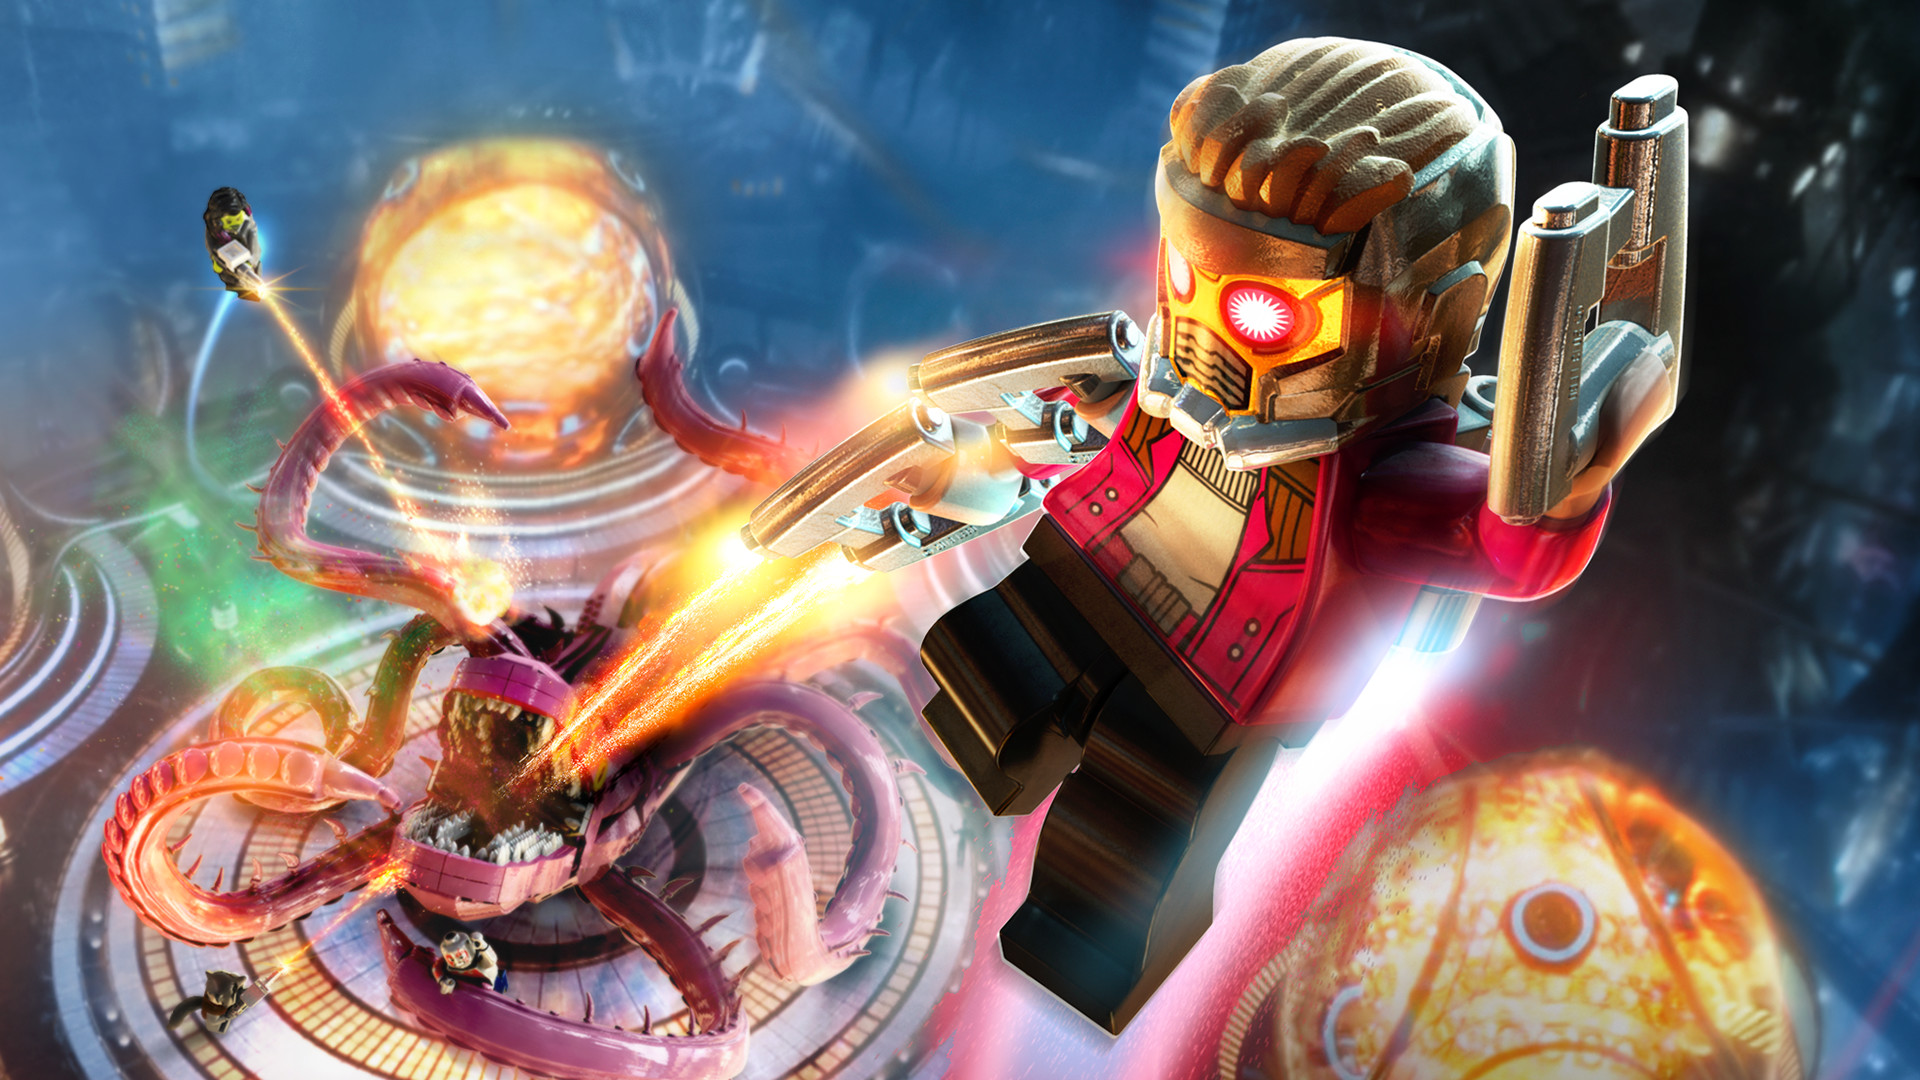 LEGO® Marvel Super Heroes 2 - Guardians of the Galaxy Vol. 2 on Steam